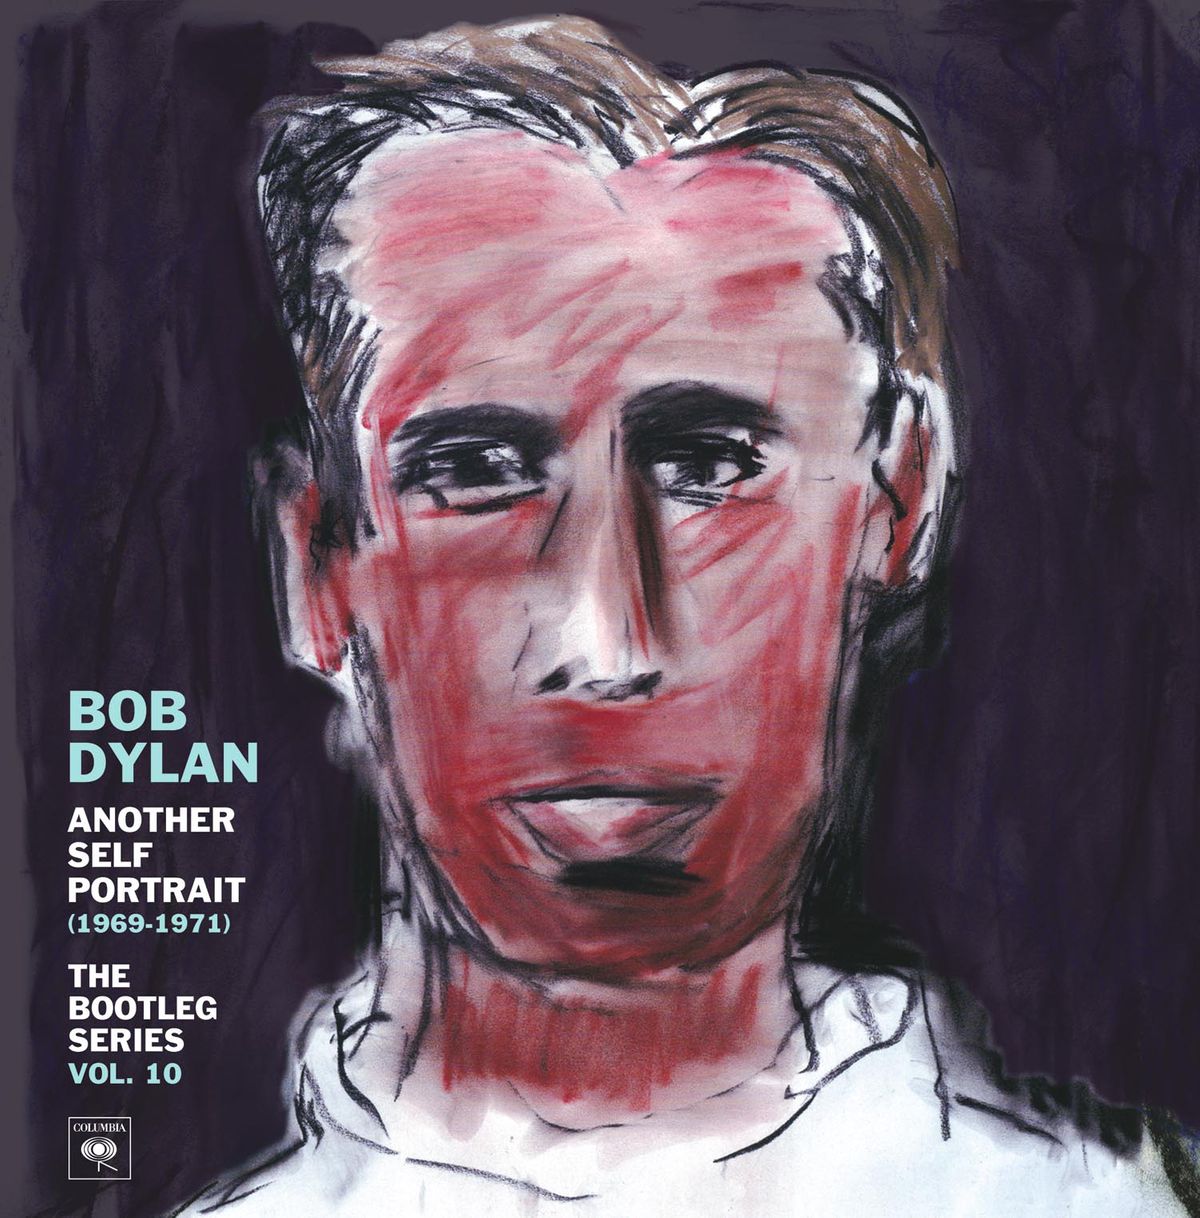 Bob Dylan - 'Another Self Portrait'